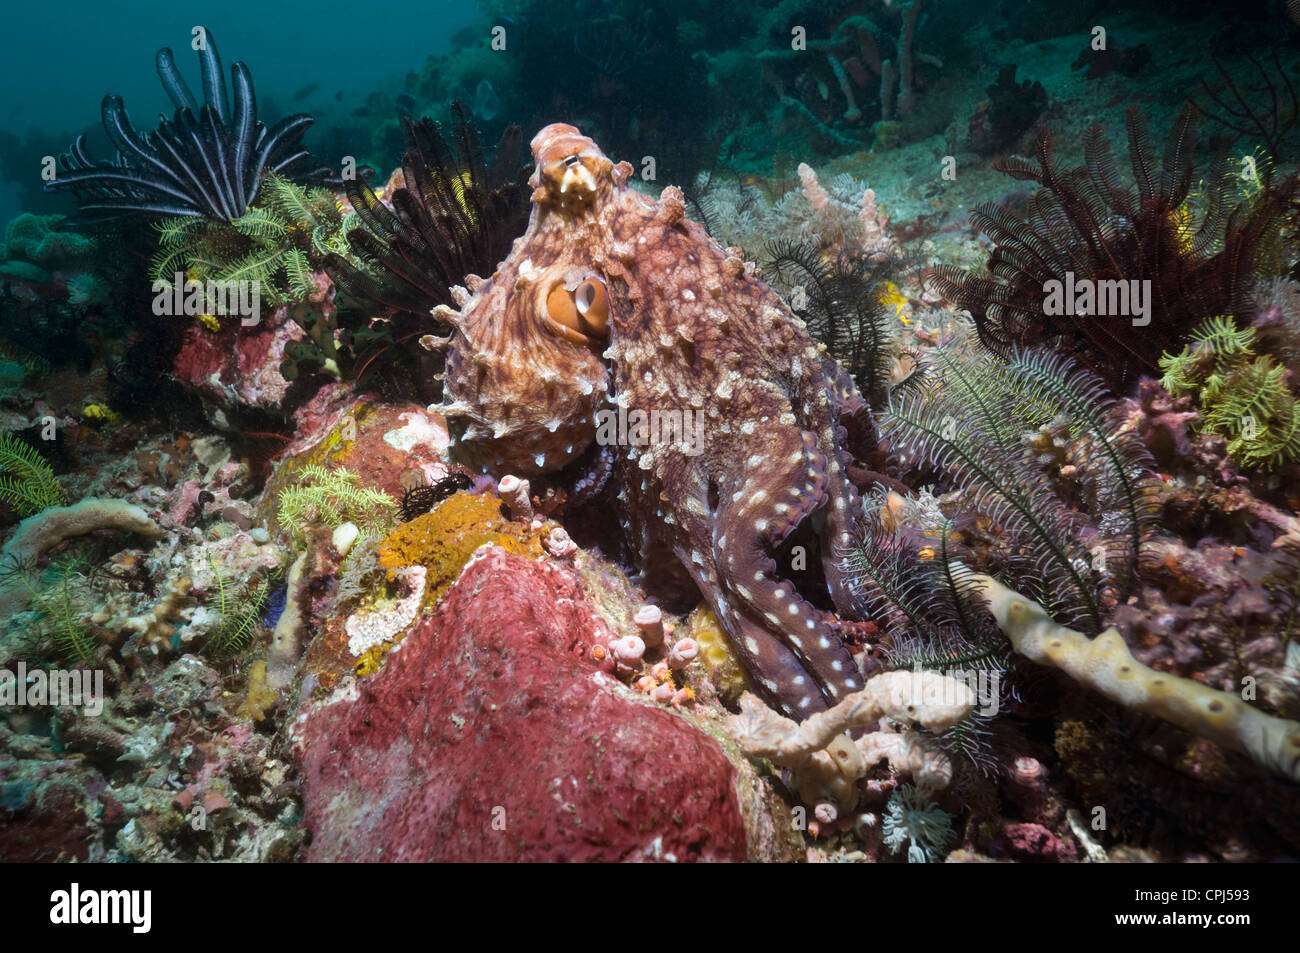 Day octopus (Octopus cyanea) hunting on coral reef with feahterstars. Komodo National Park, Indonesia. Stock Photo